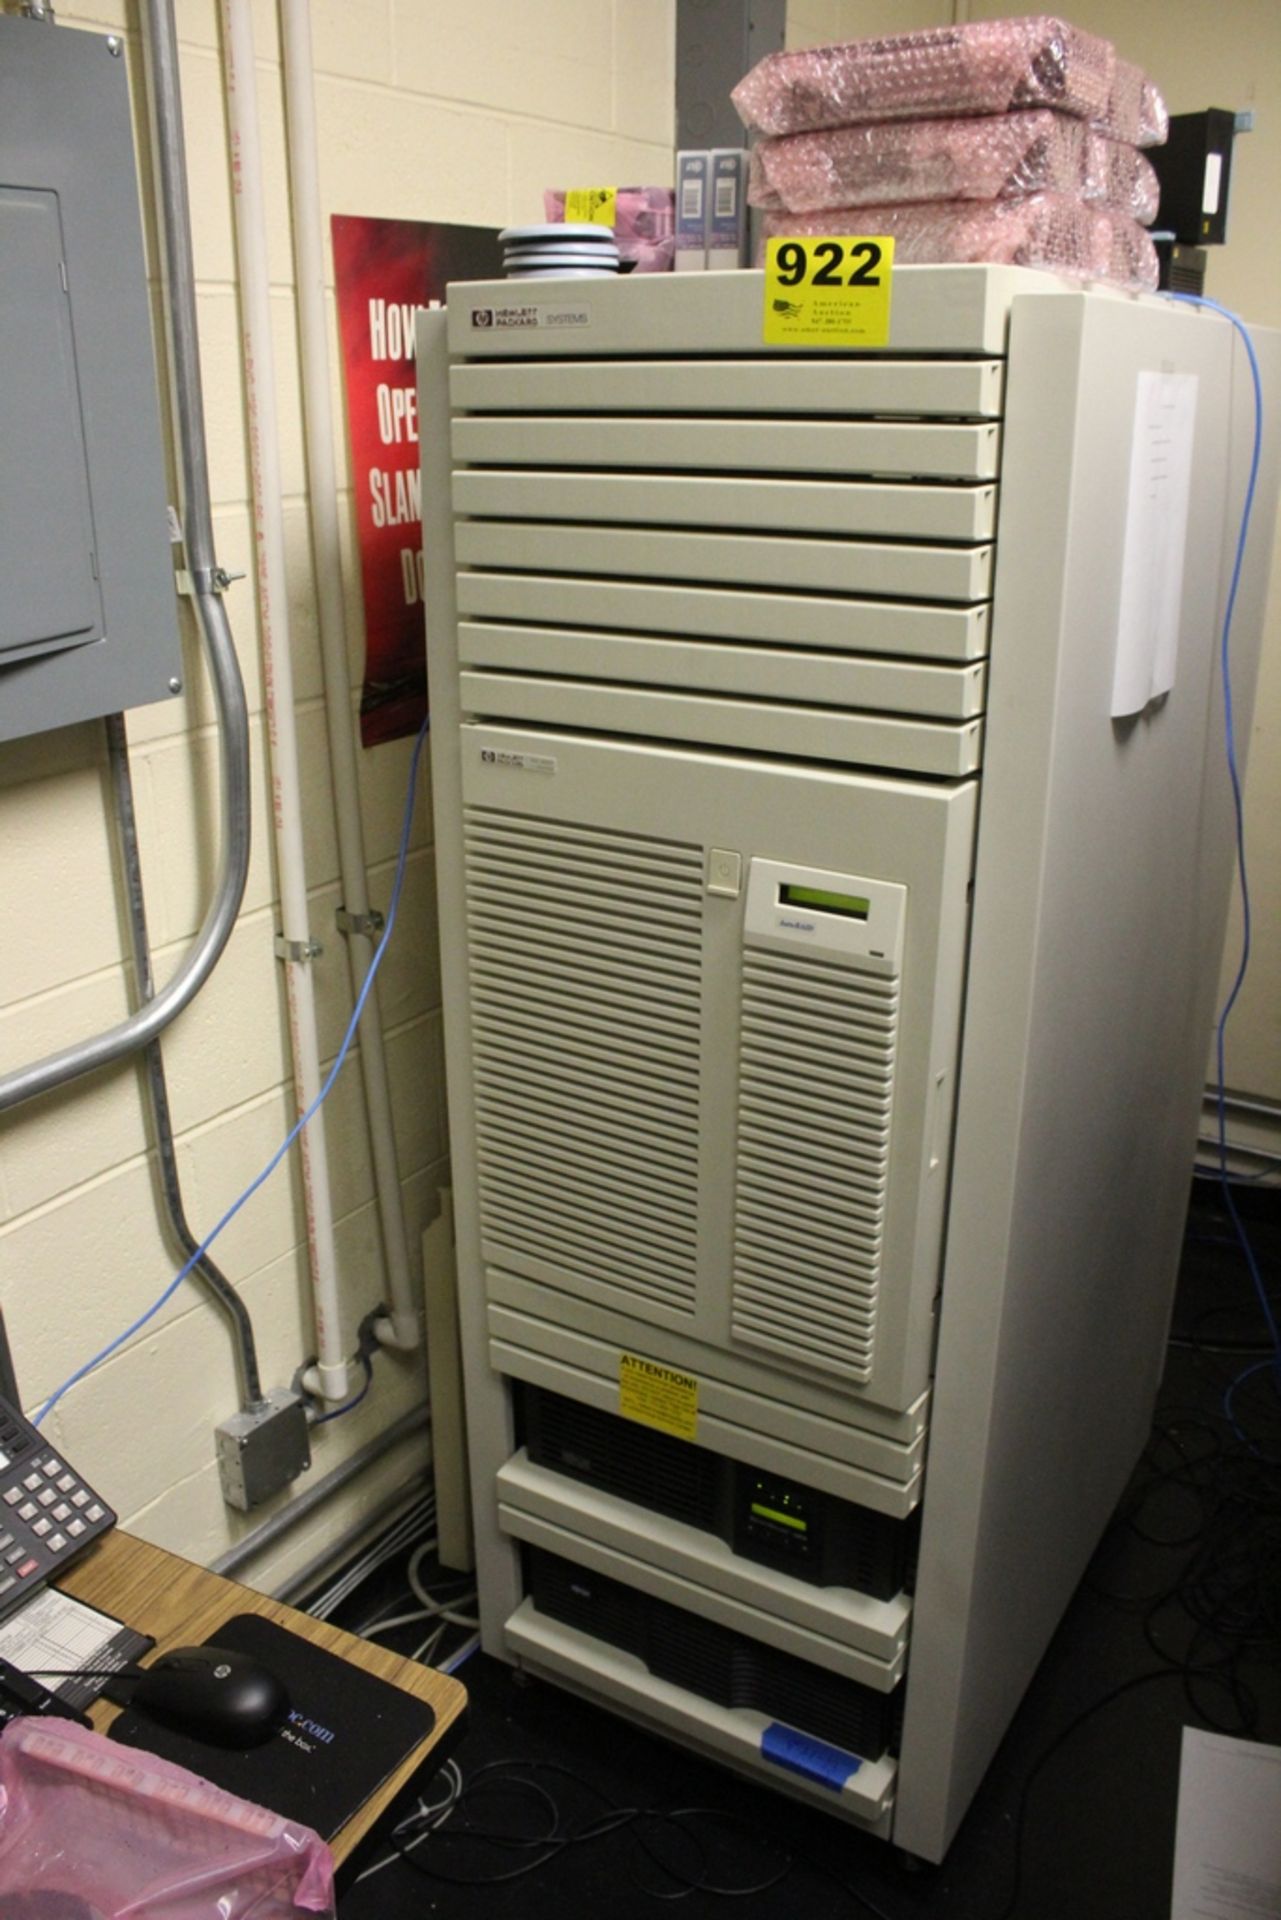 HEWLETT PACKARD SERVER SYSTEM WITH DISK ARRAY WITH AUTO RAD AND (2) TRIPP-LITE BATTERY BACKUPS